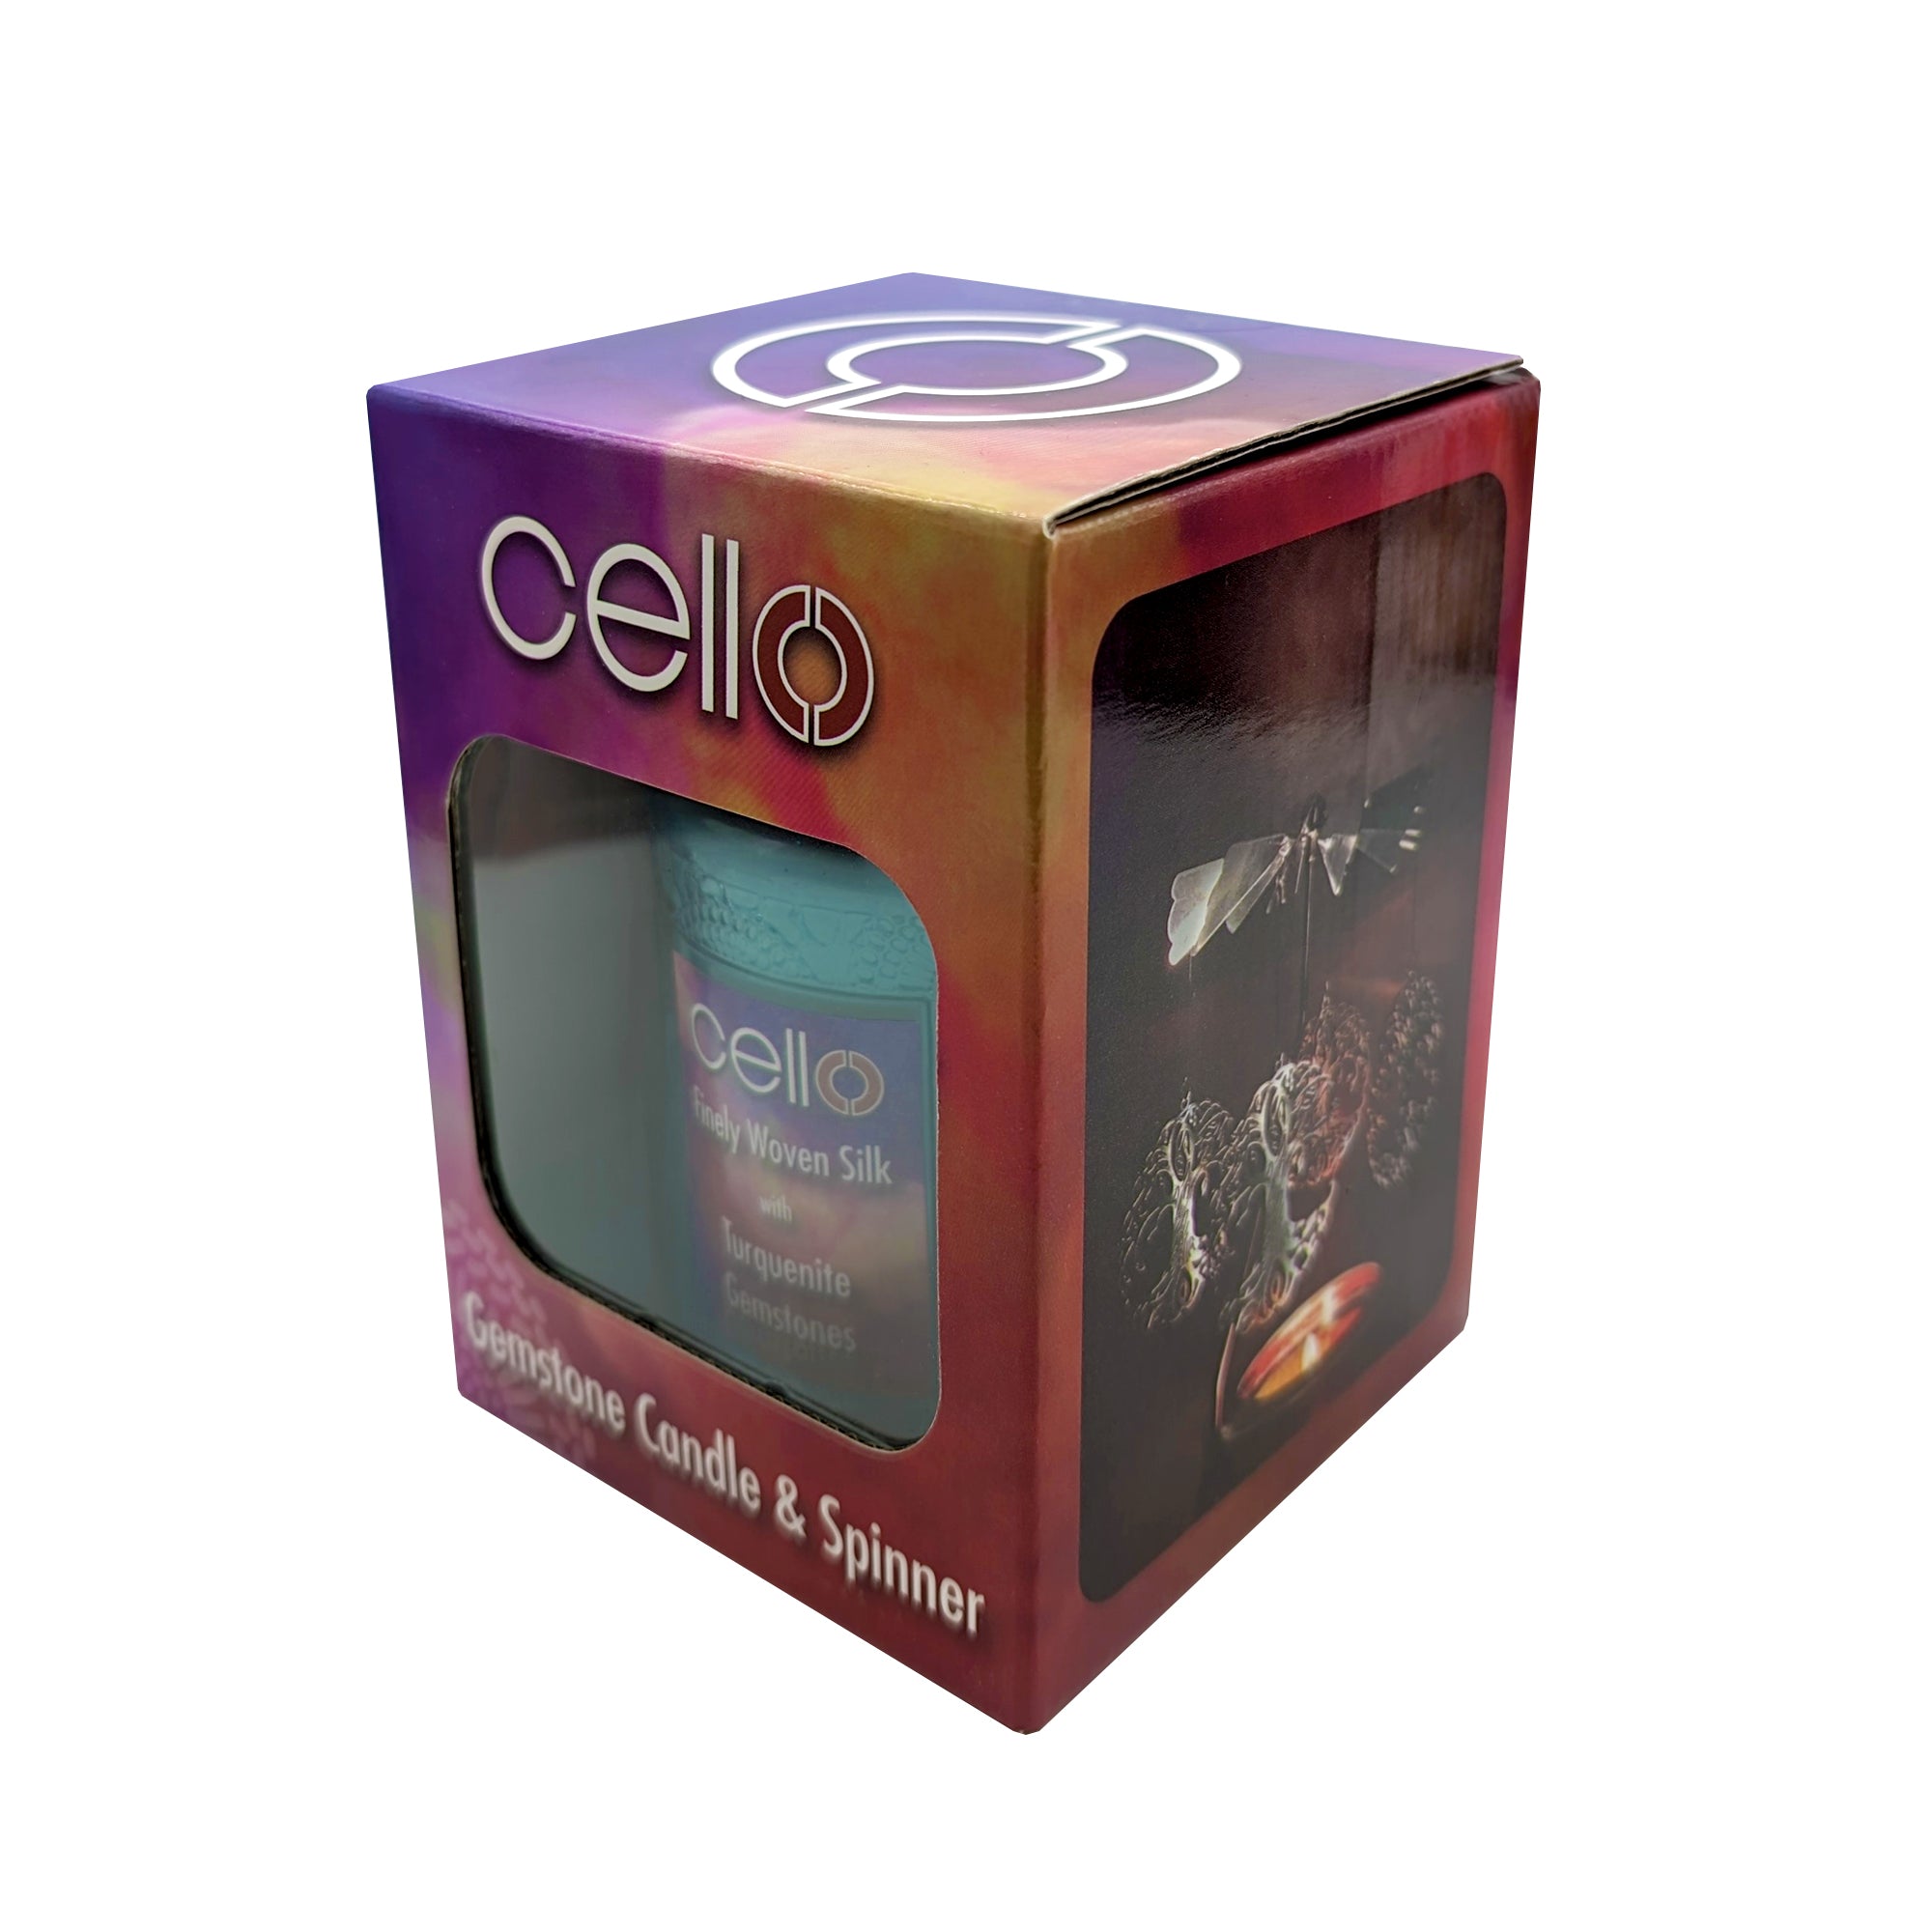 Cello - Gemstone Candle 200g with Convection Spinner - Finely Woven Silk with Turquenite